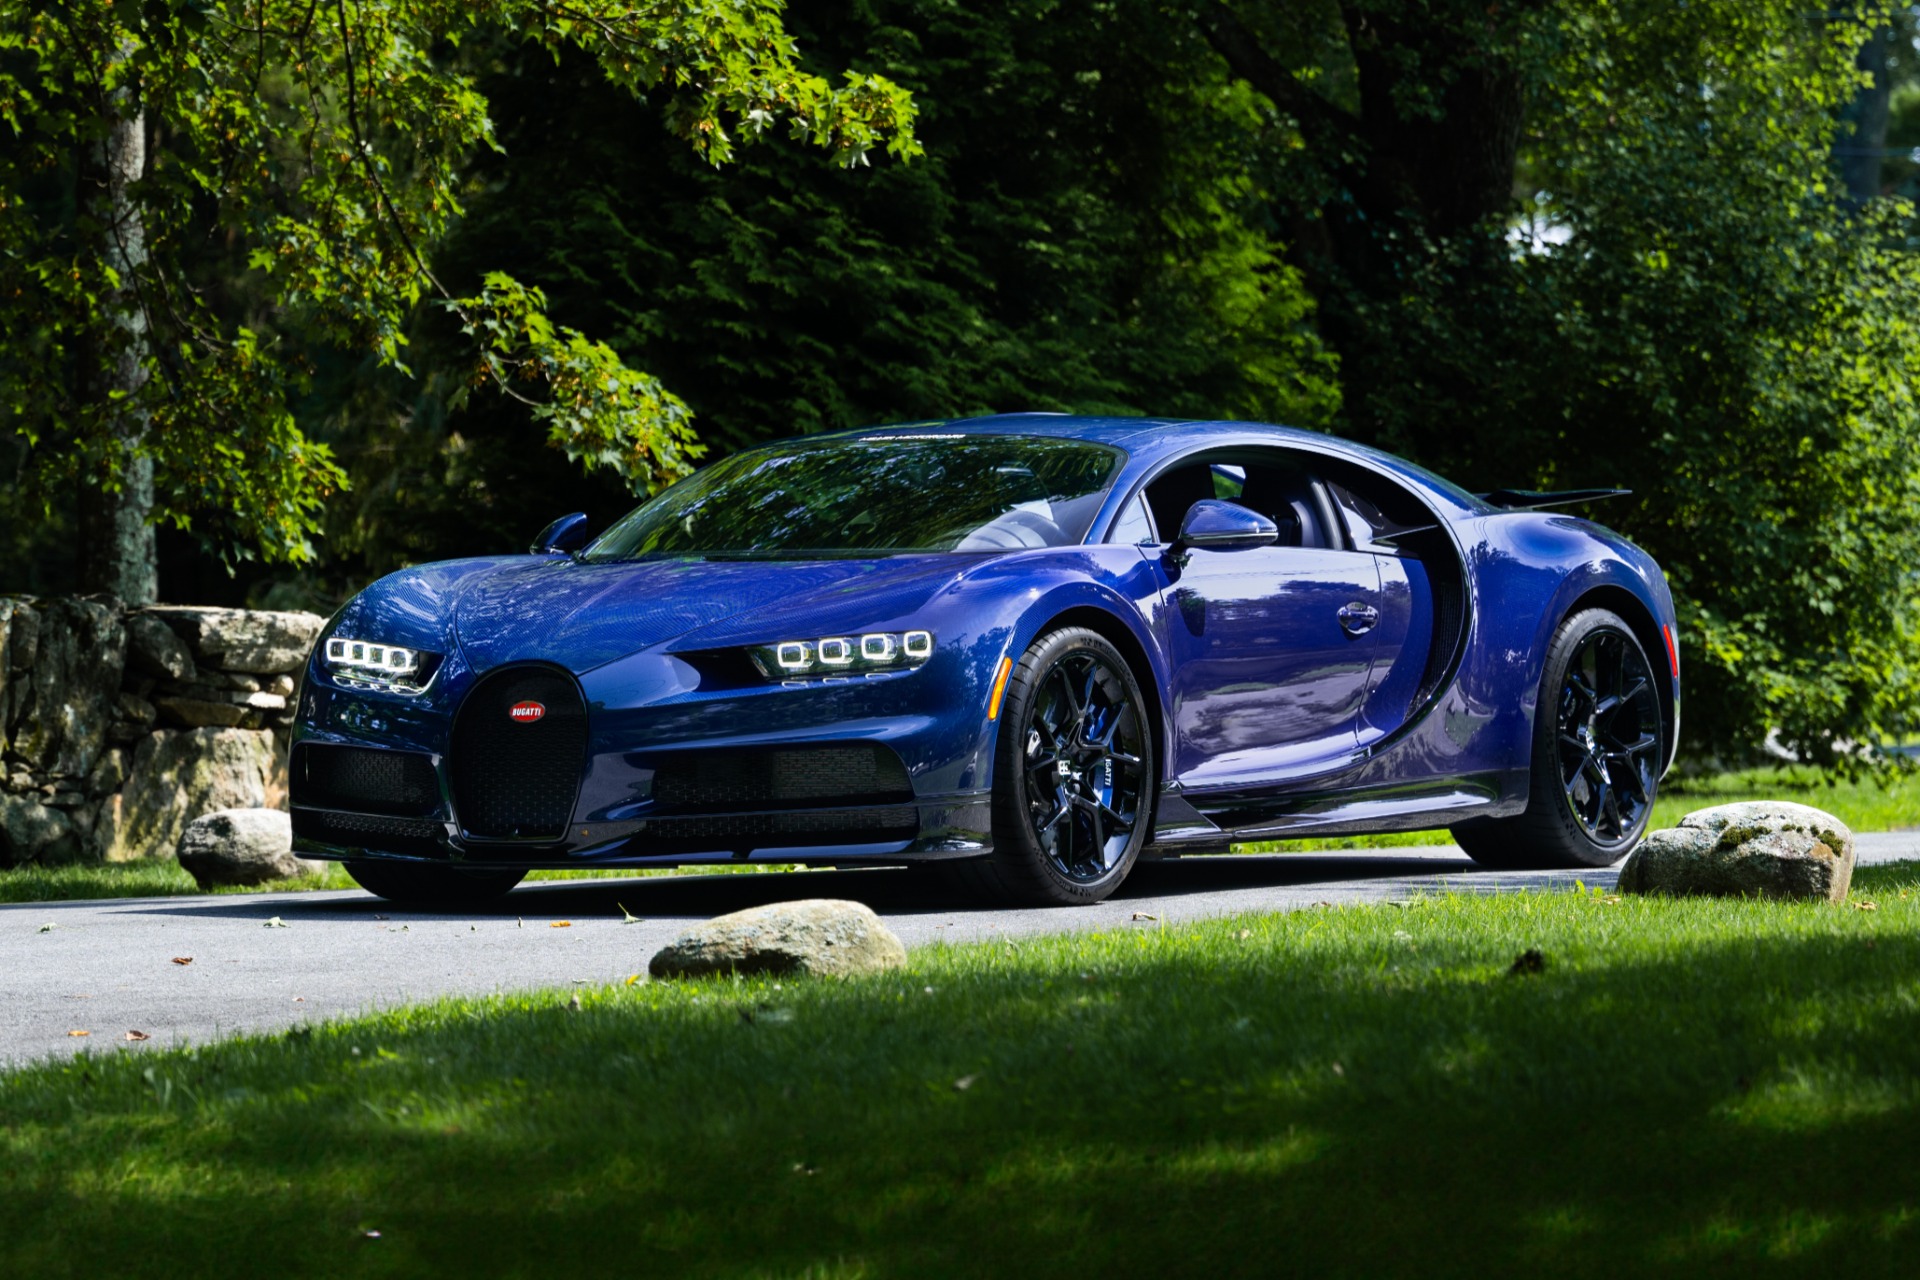 Used 2018 Bugatti Chiron Chiron for sale Sold at Bentley Greenwich in Greenwich CT 06830 1